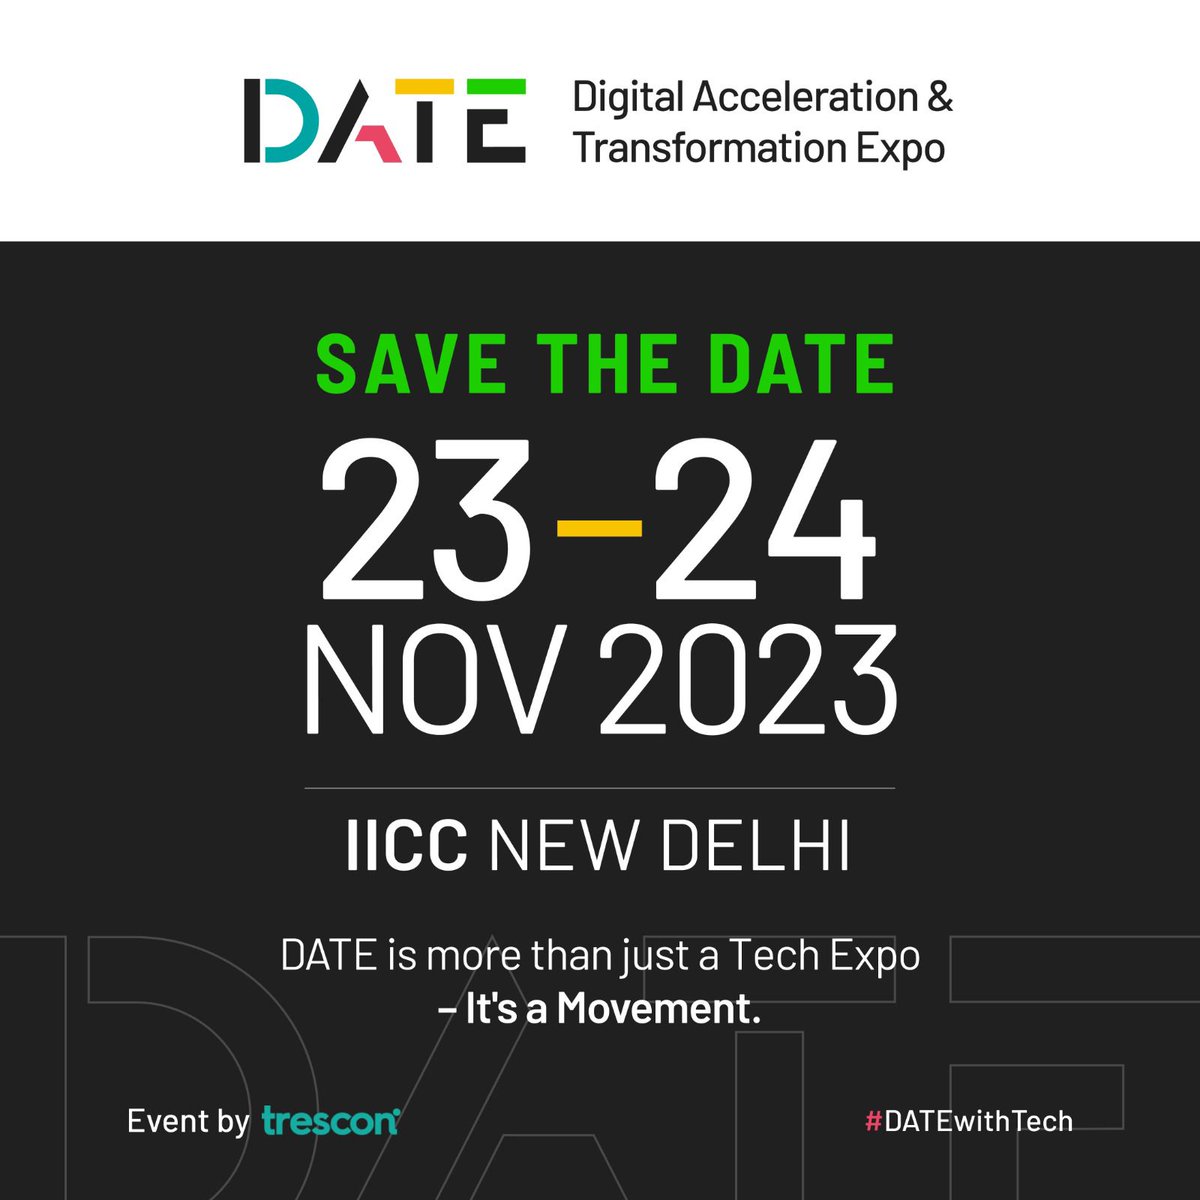 DATE - Digital Acceleration Transformation Expo! 

Save the Date: 23-24 November 2023 | IICC New Delhi | Hosted by Trescon. 

Get your pass today: hubs.li/Q01ZTrmv0  

#Trescon #DATEExpo #DigitalAcceleration #TransformationExpo